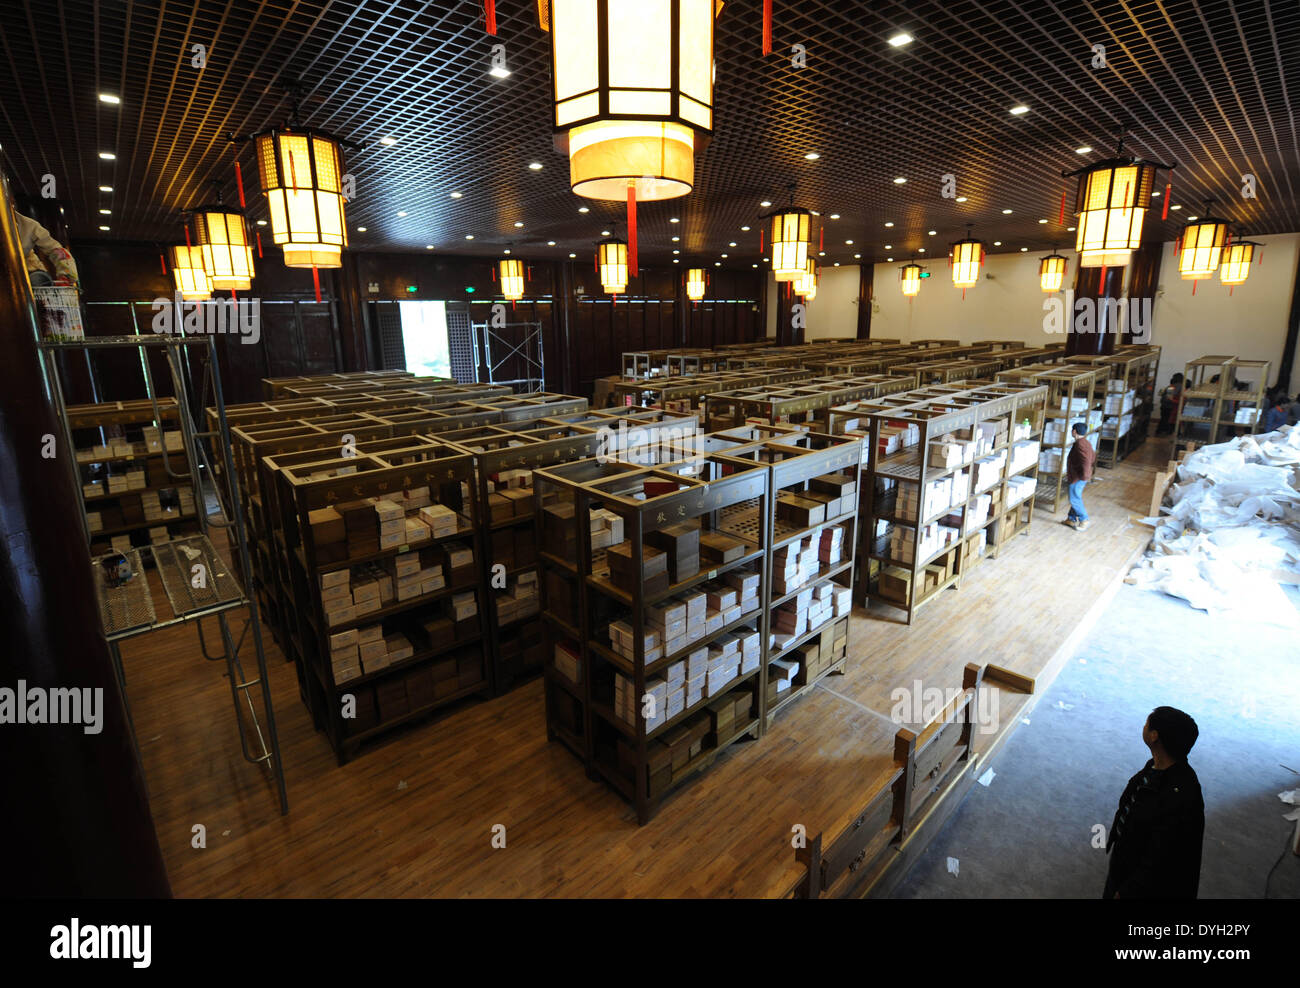 (140418) -- YANGZHOU, April 18, 2014 (Xinhua) -- Workers settle the duplicate of a classic Chinese book, the 'Siku Quanshu,' or the 'Complete Library in the Four Branches of Literature,' in the Wanfo Building at Tianning Temple of Yangzhou, east China's Jiangsu Province, April 16, 2014. The reproduction will be open to the public free of charge starting from April 18. Compilation of the 'Siku Quanshu,' launched under the reign of Emperor Qianlong (1736-1795) in the Qing Dynasty (1644-1911) and organized by the literary emperor himself, took 15 years to complete. The Yangzhou copy of the master Stock Photo